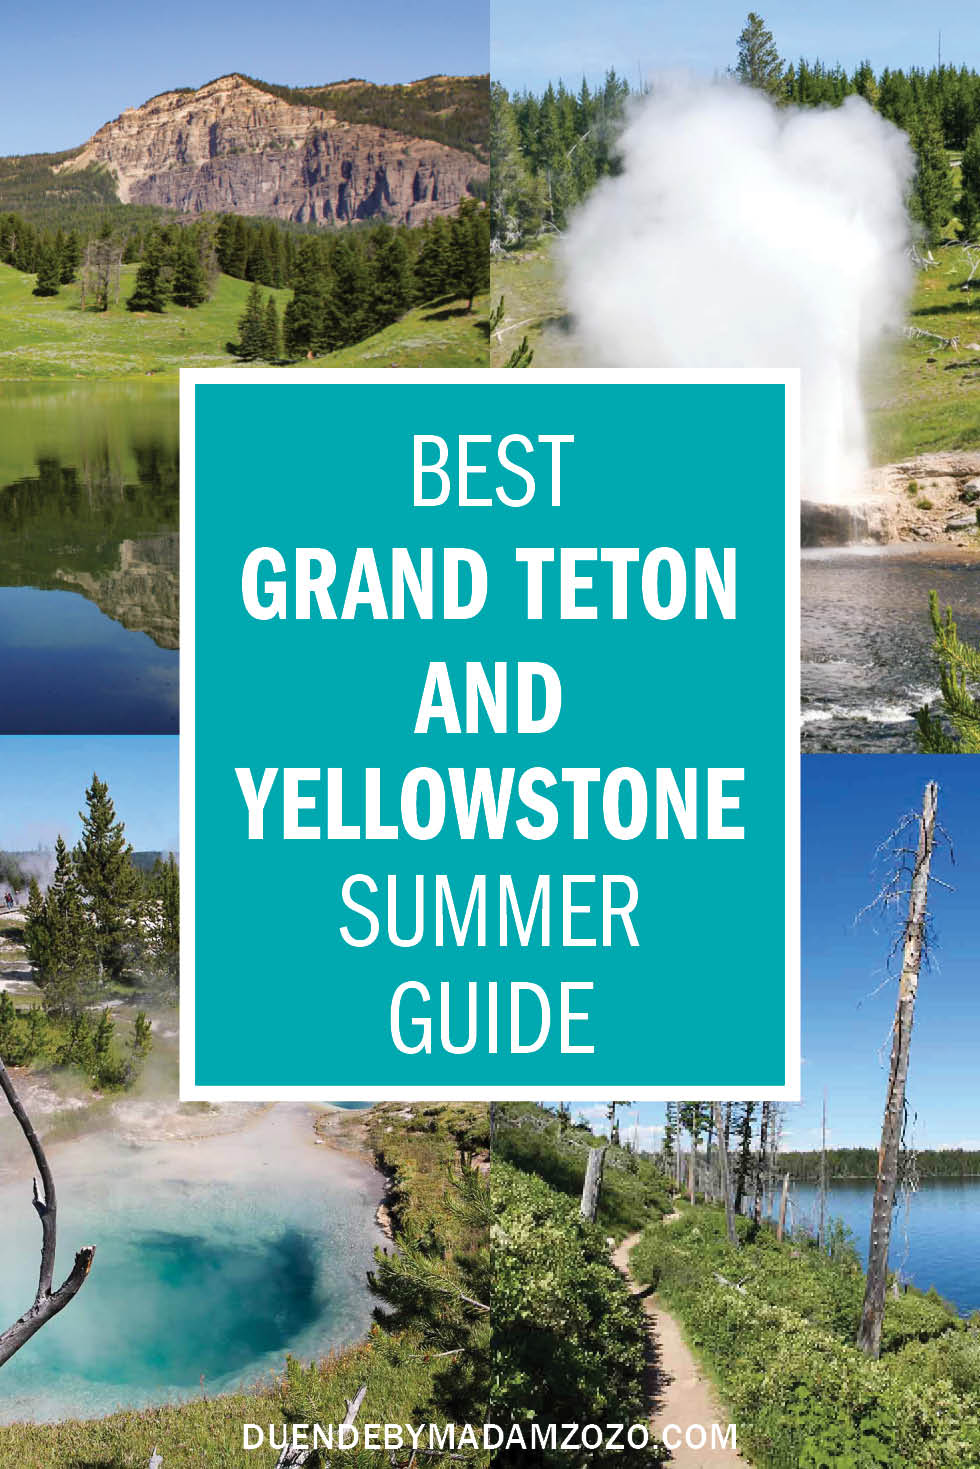 Images of Yellowstone National Park landscapes wiht text overlay reading "Best Grand Teton and Yellowstone Summer Guide"